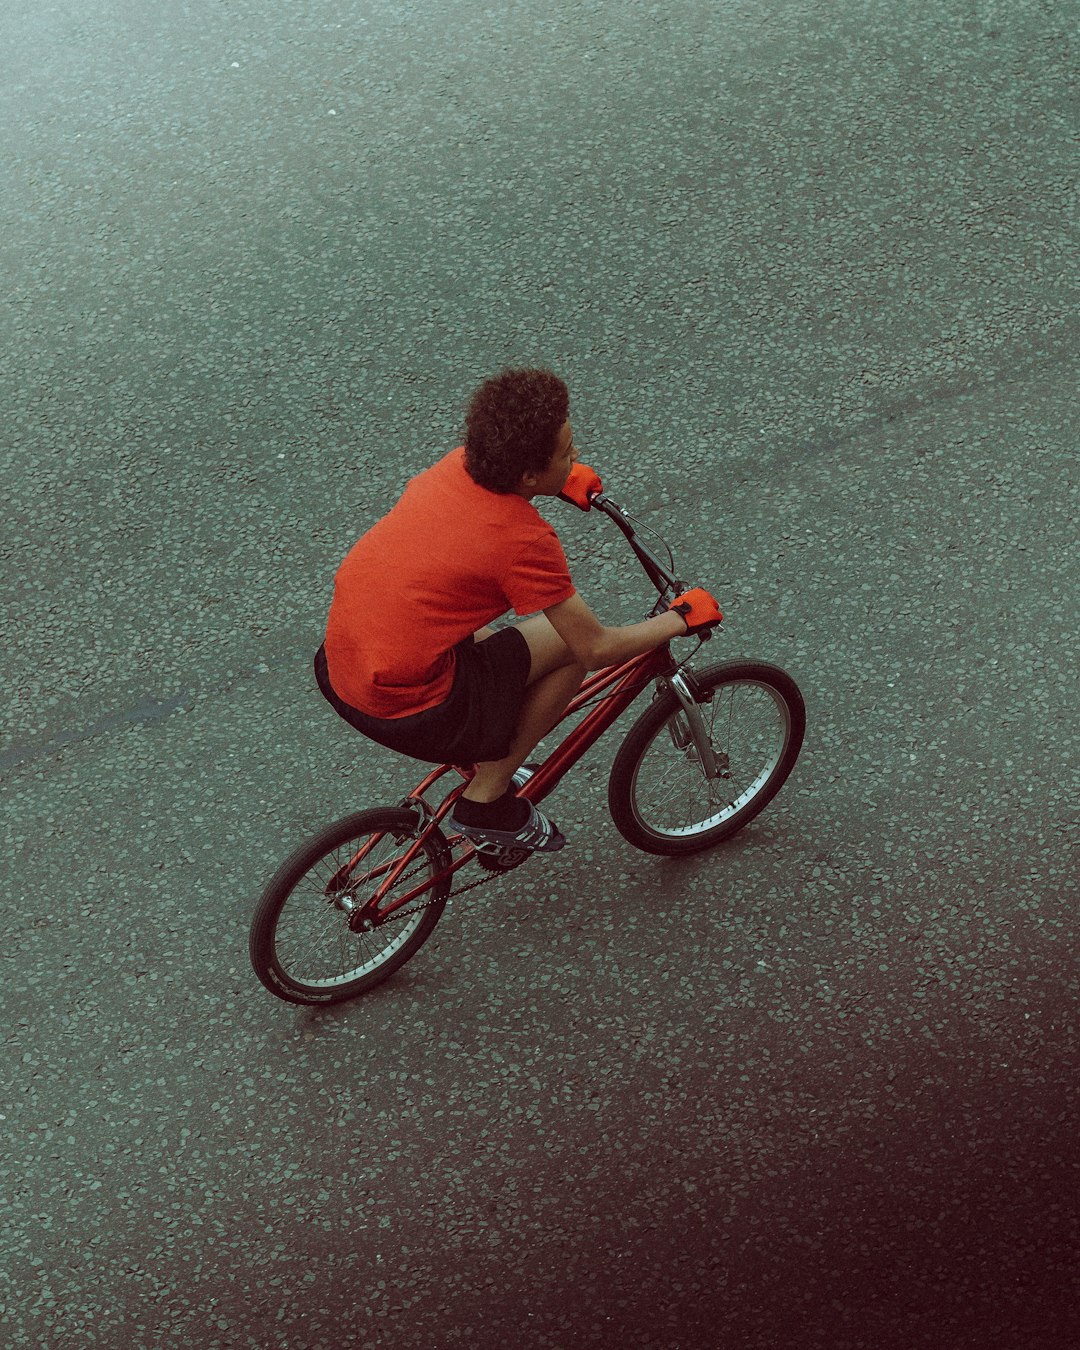 man in red shirt riding on bicycle on gray asphalt road during daytime